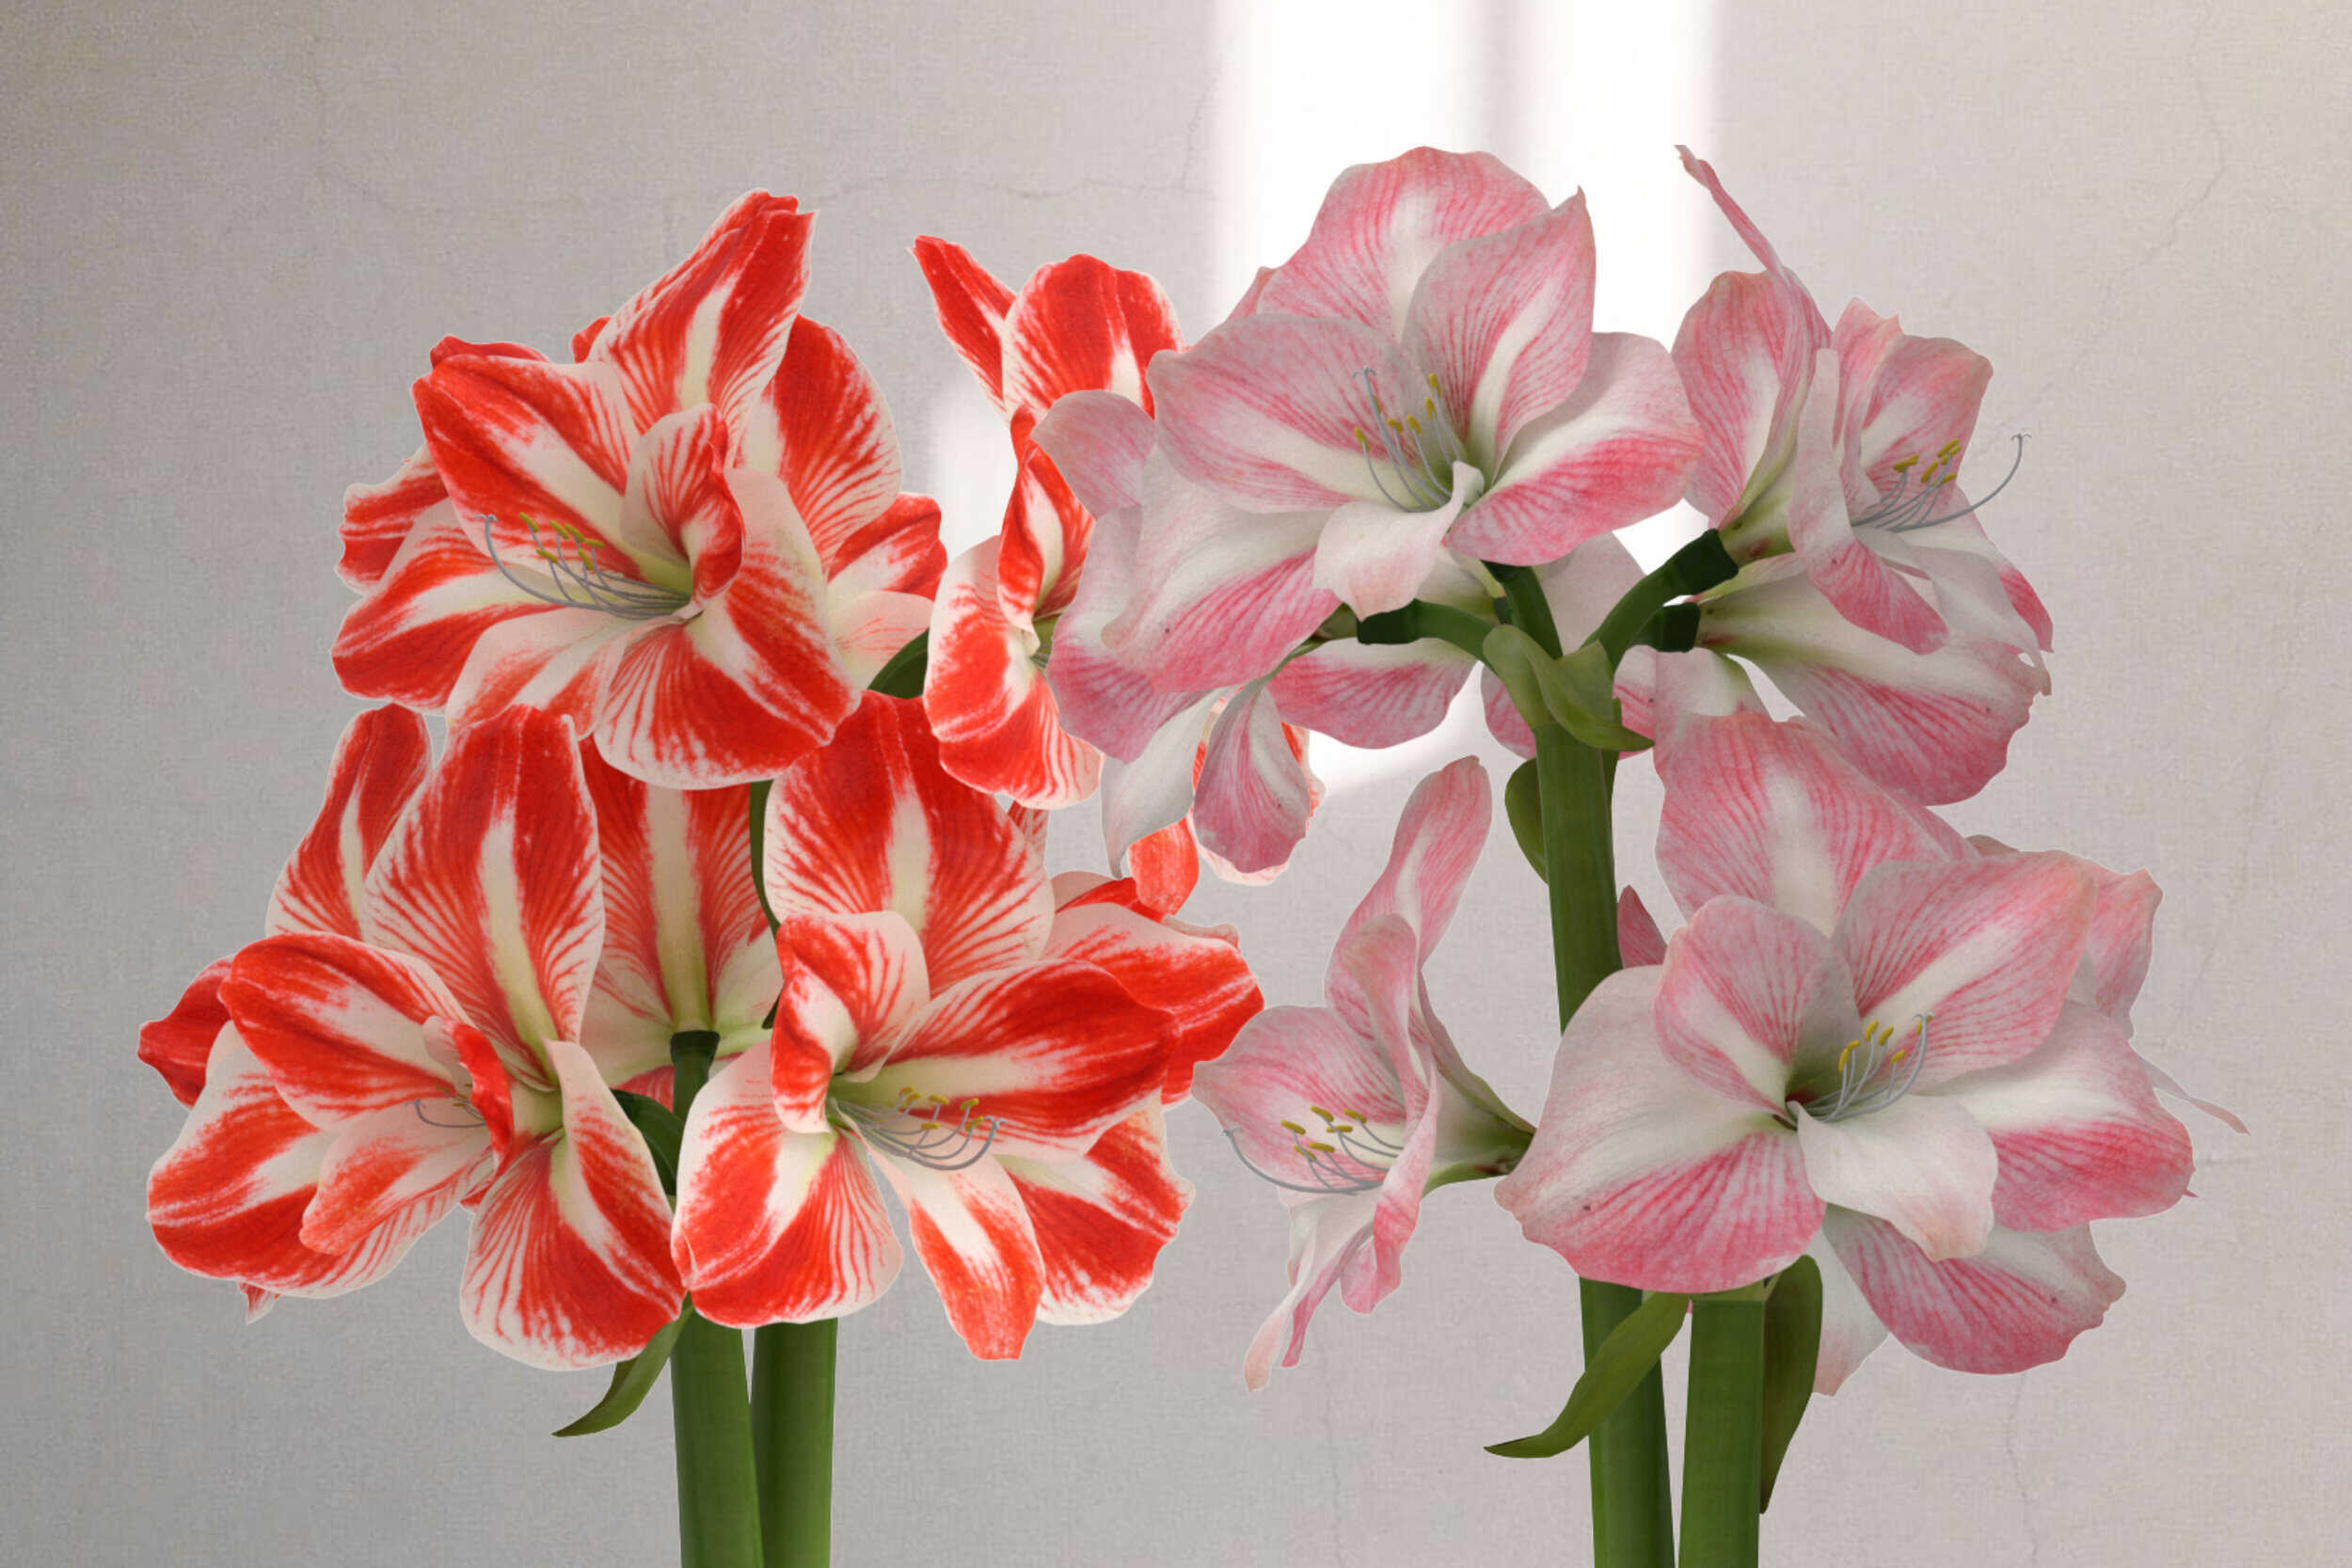 10 Amaryllis Flower Facts - Facts.net